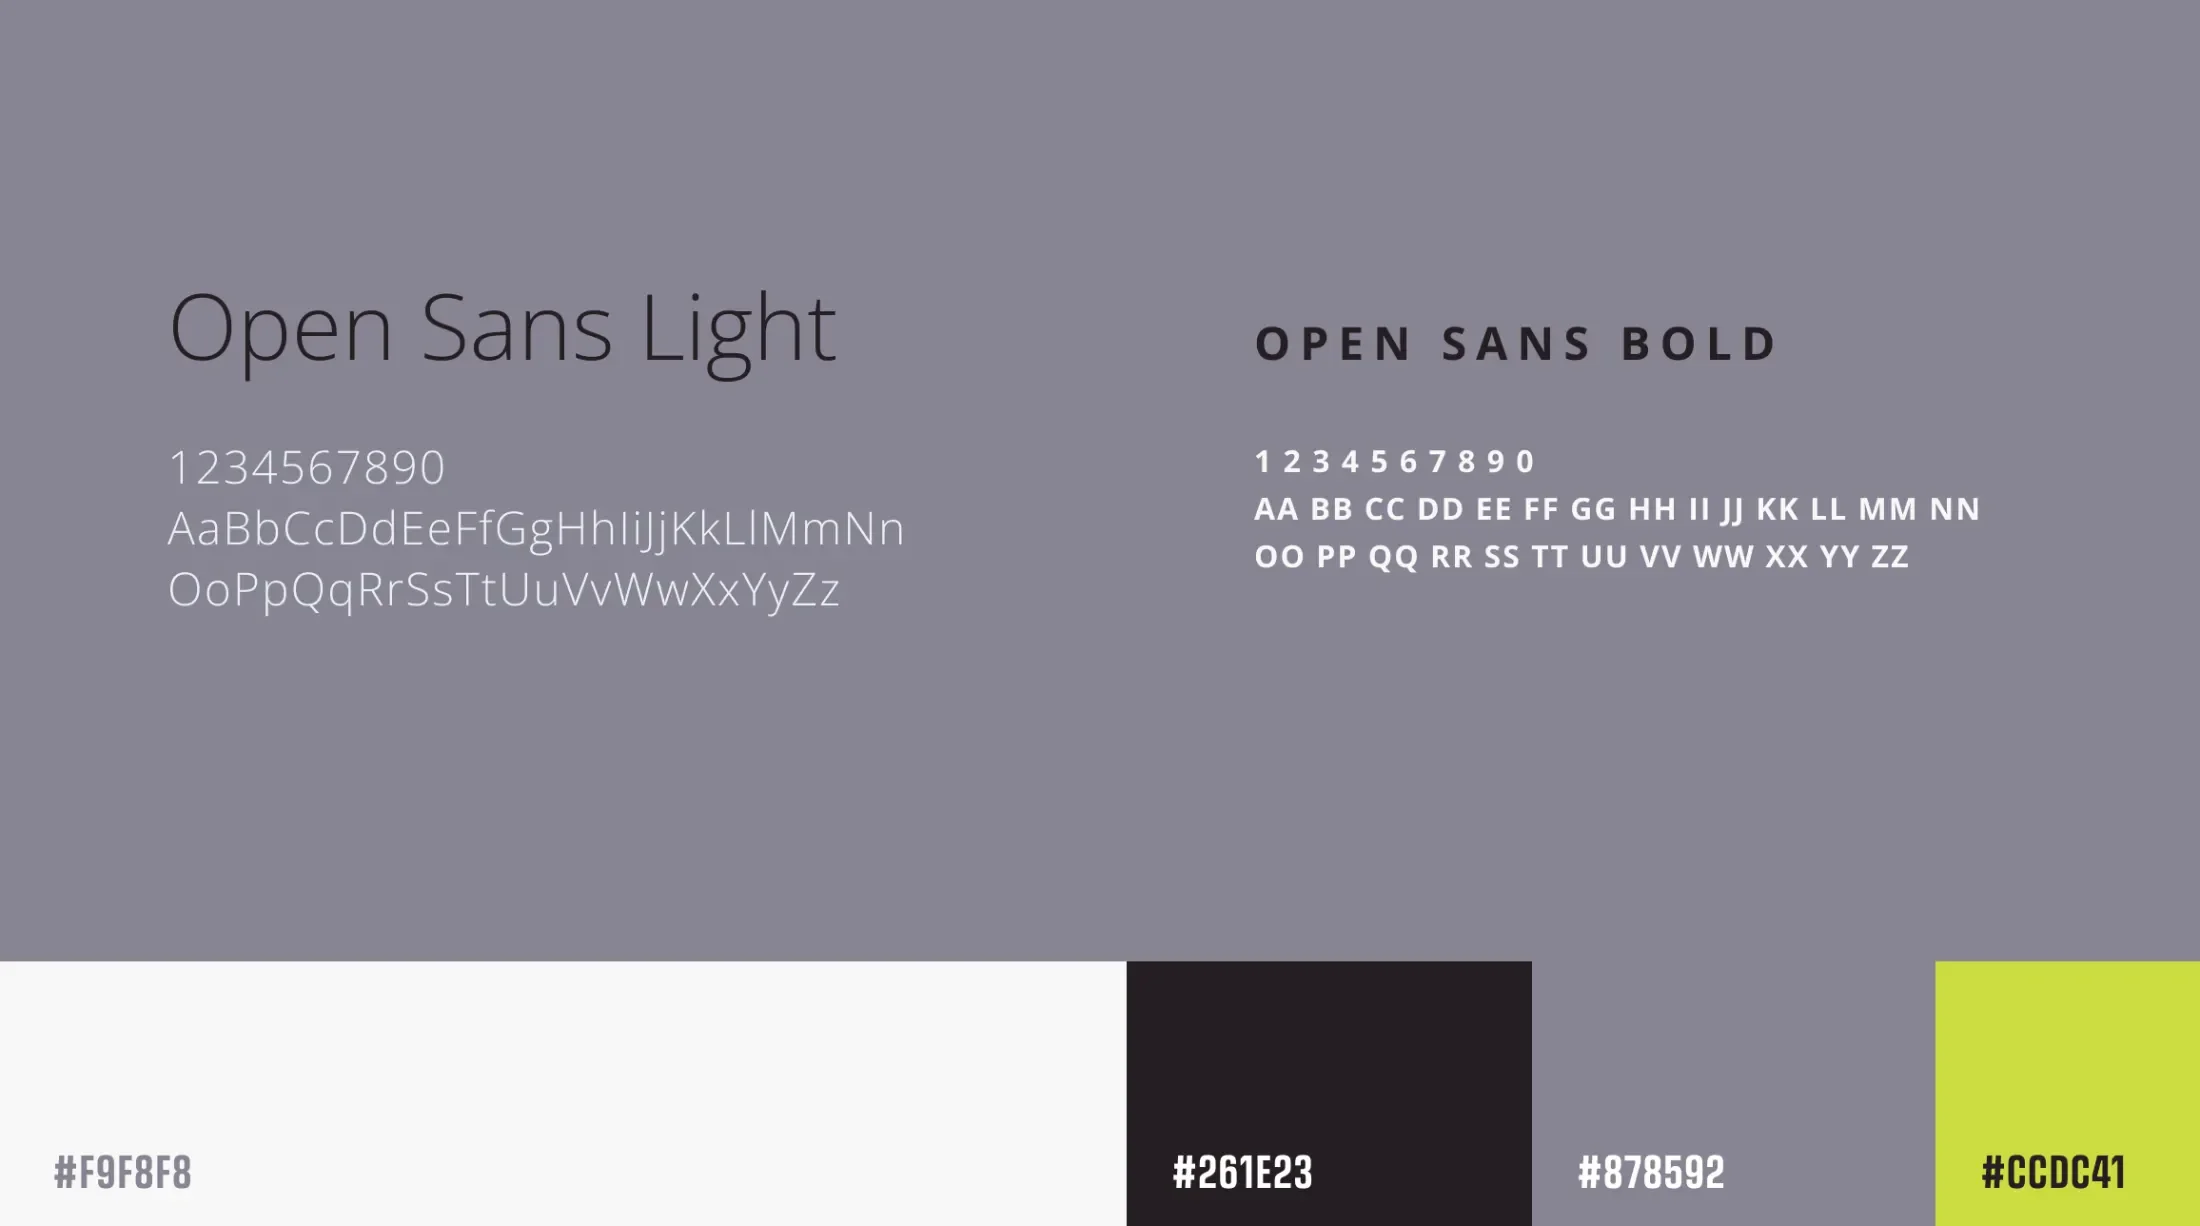 Design Central brand fonts, Open Sans light and bold, as well as their colors